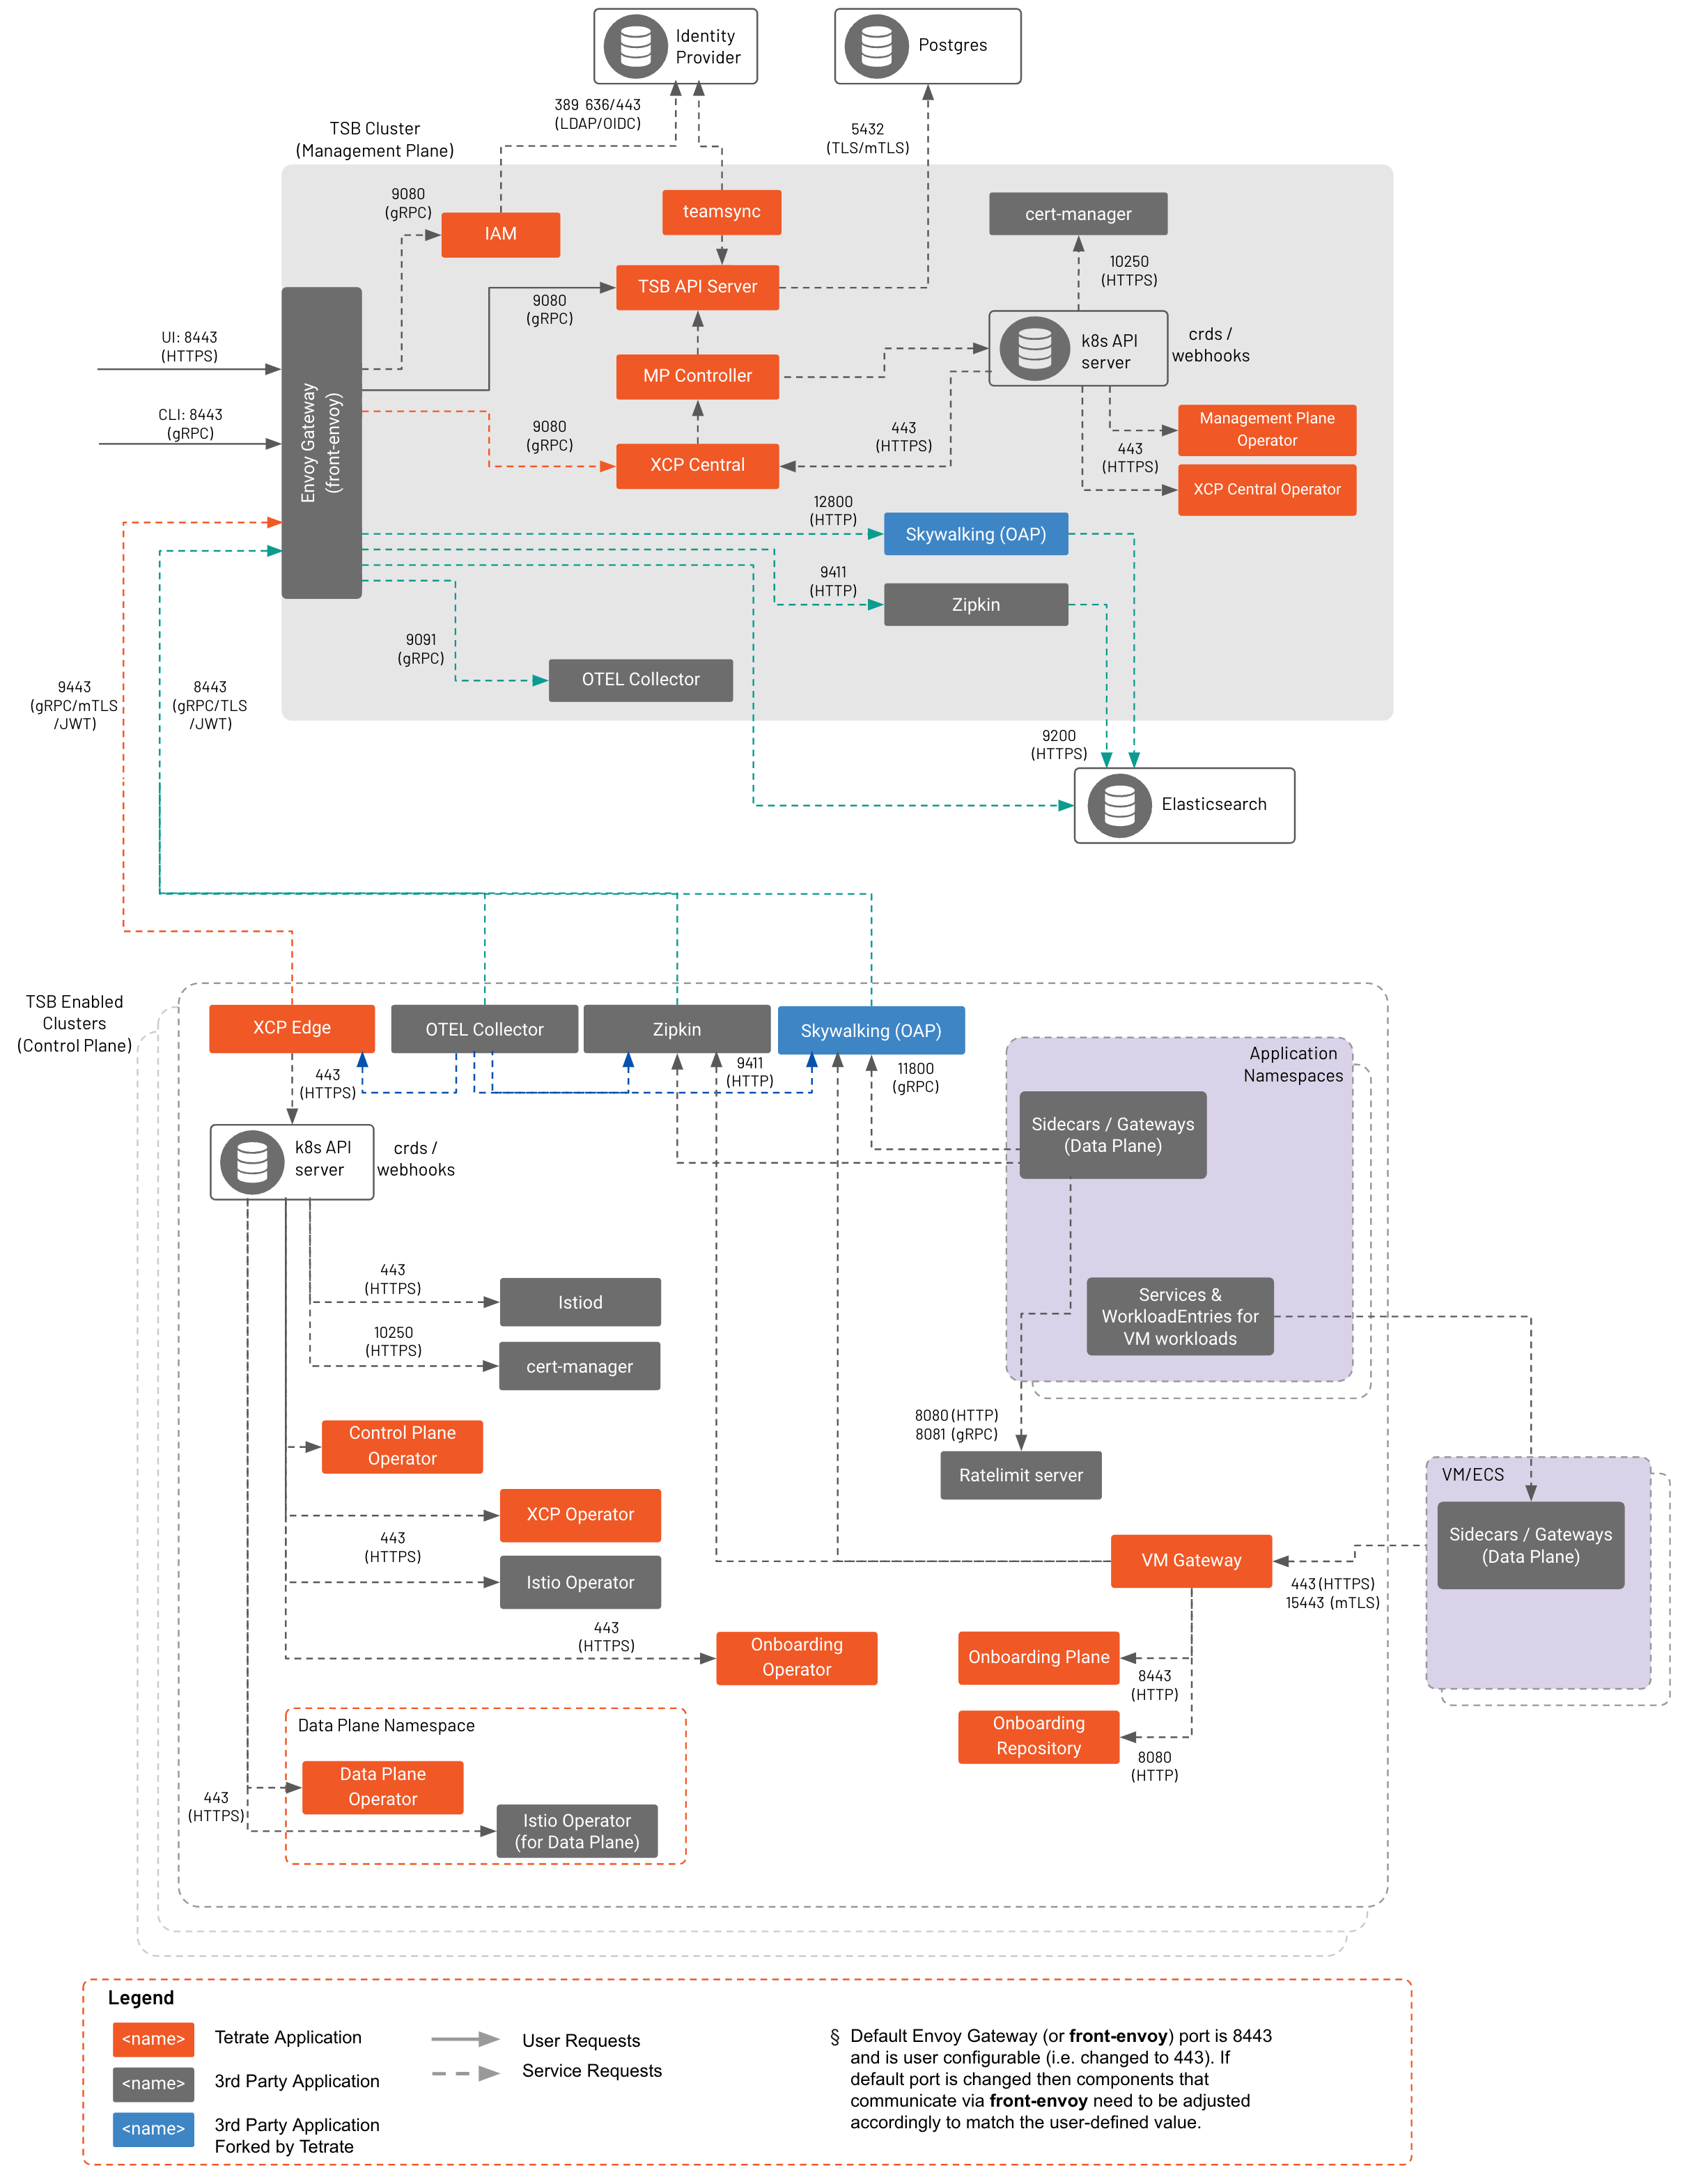 Detailed diagram of the data flow between TSB components.